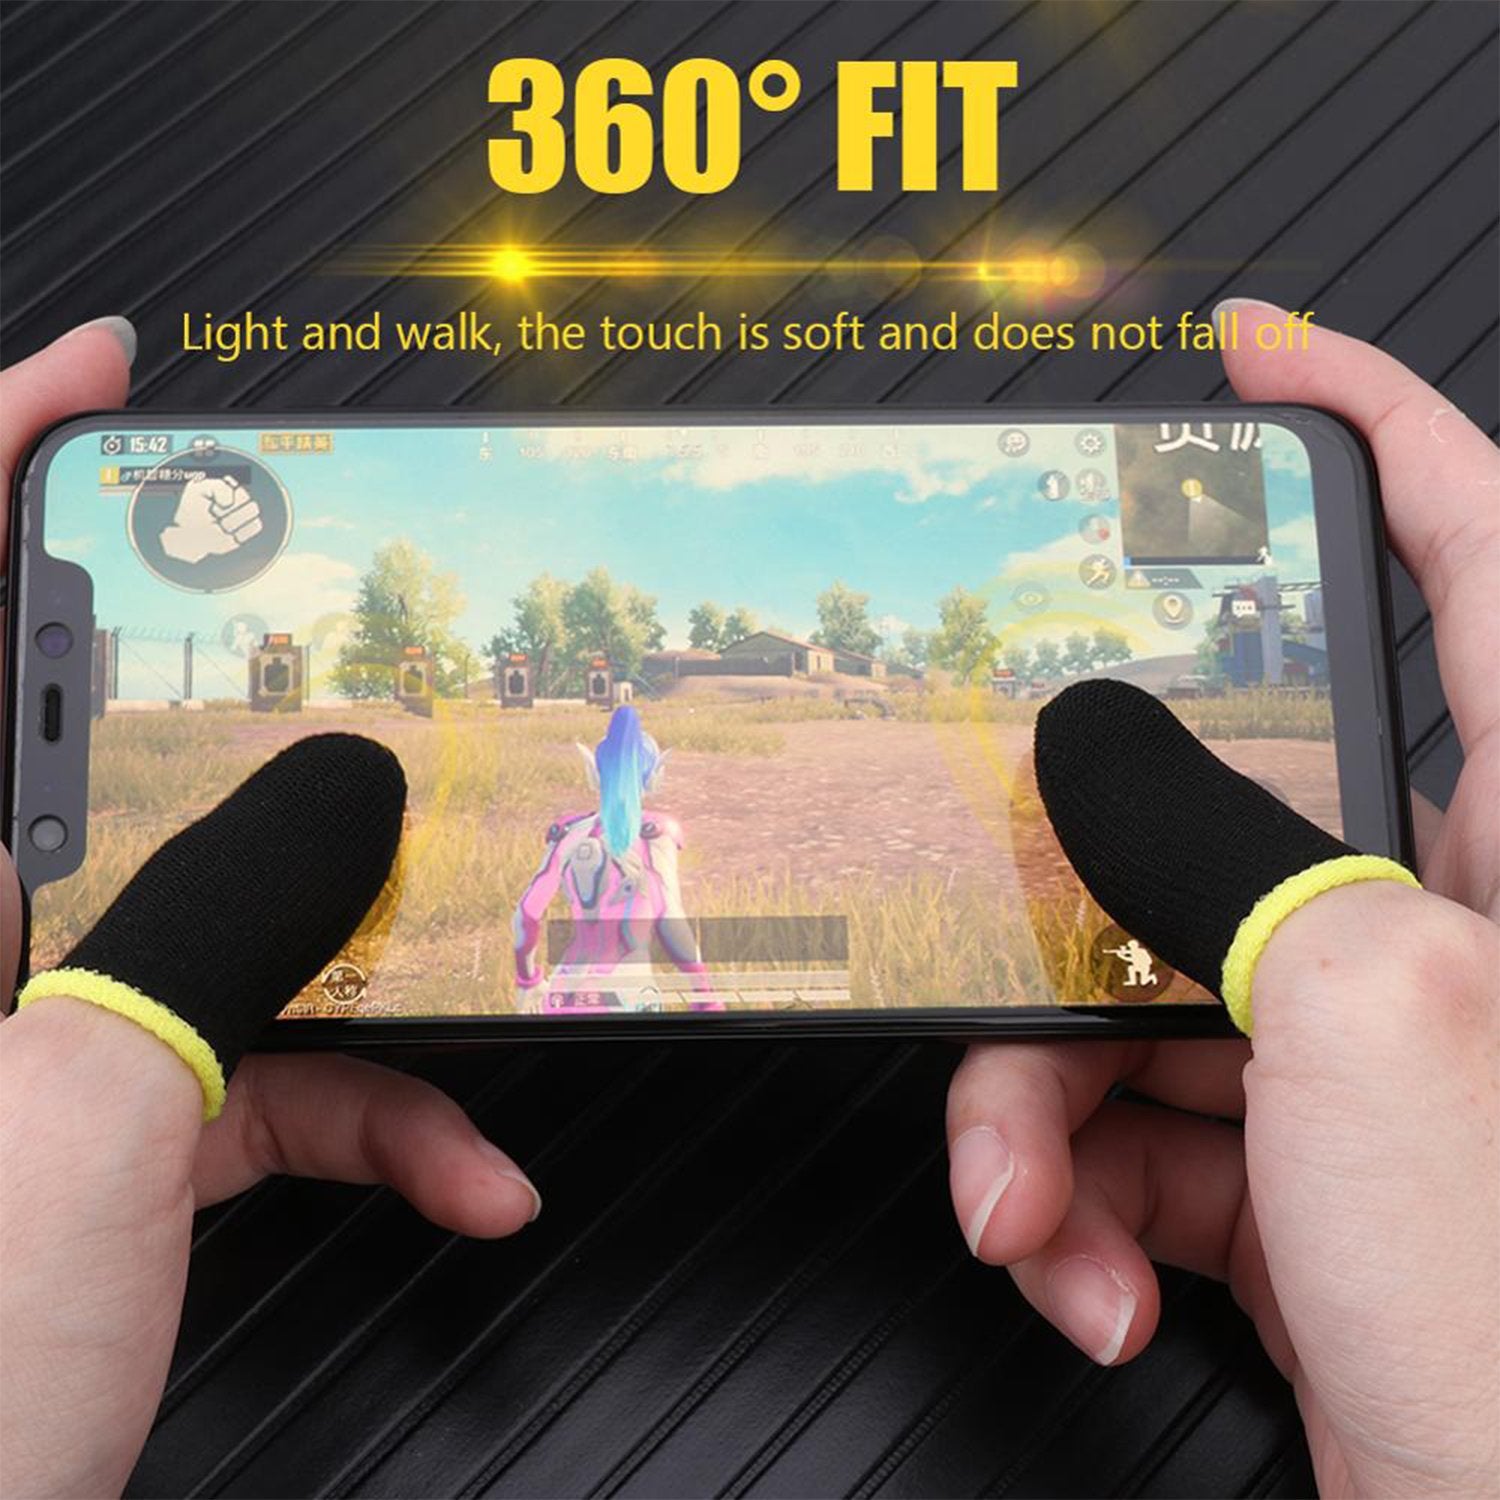 7391 Thumb & Finger Sleeve for Mobile Game, Pubg,Cod,Freefire (1Pair only)